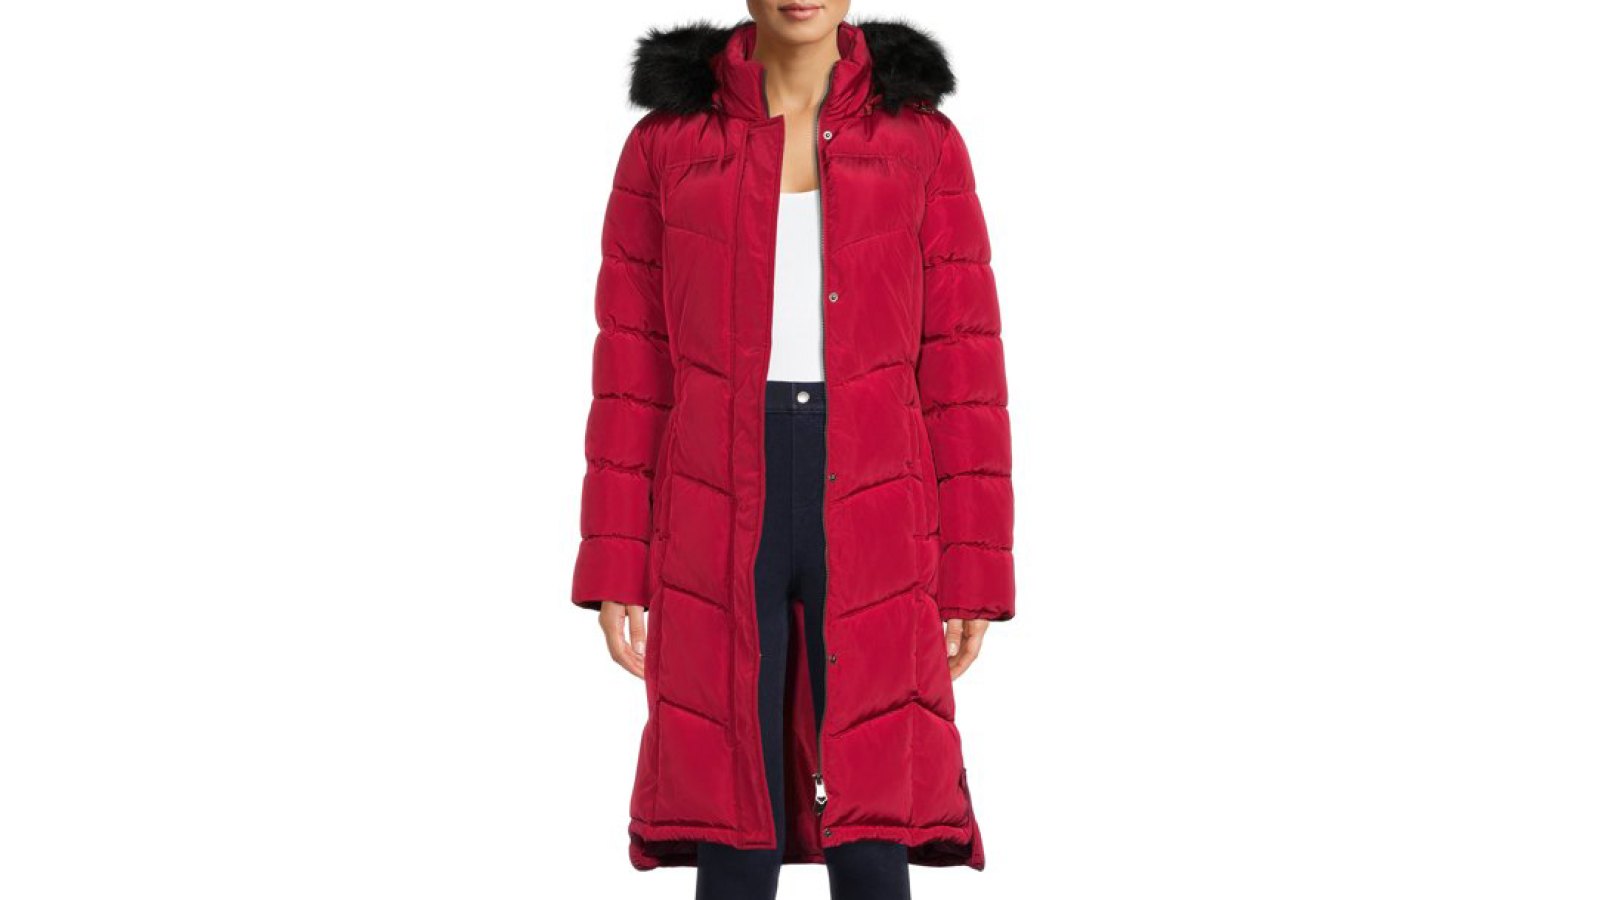 Layered Winter Style - Penny Pincher Fashion  Winter jacket outfits, Winter  coat outfits, Puffer jacket outfit